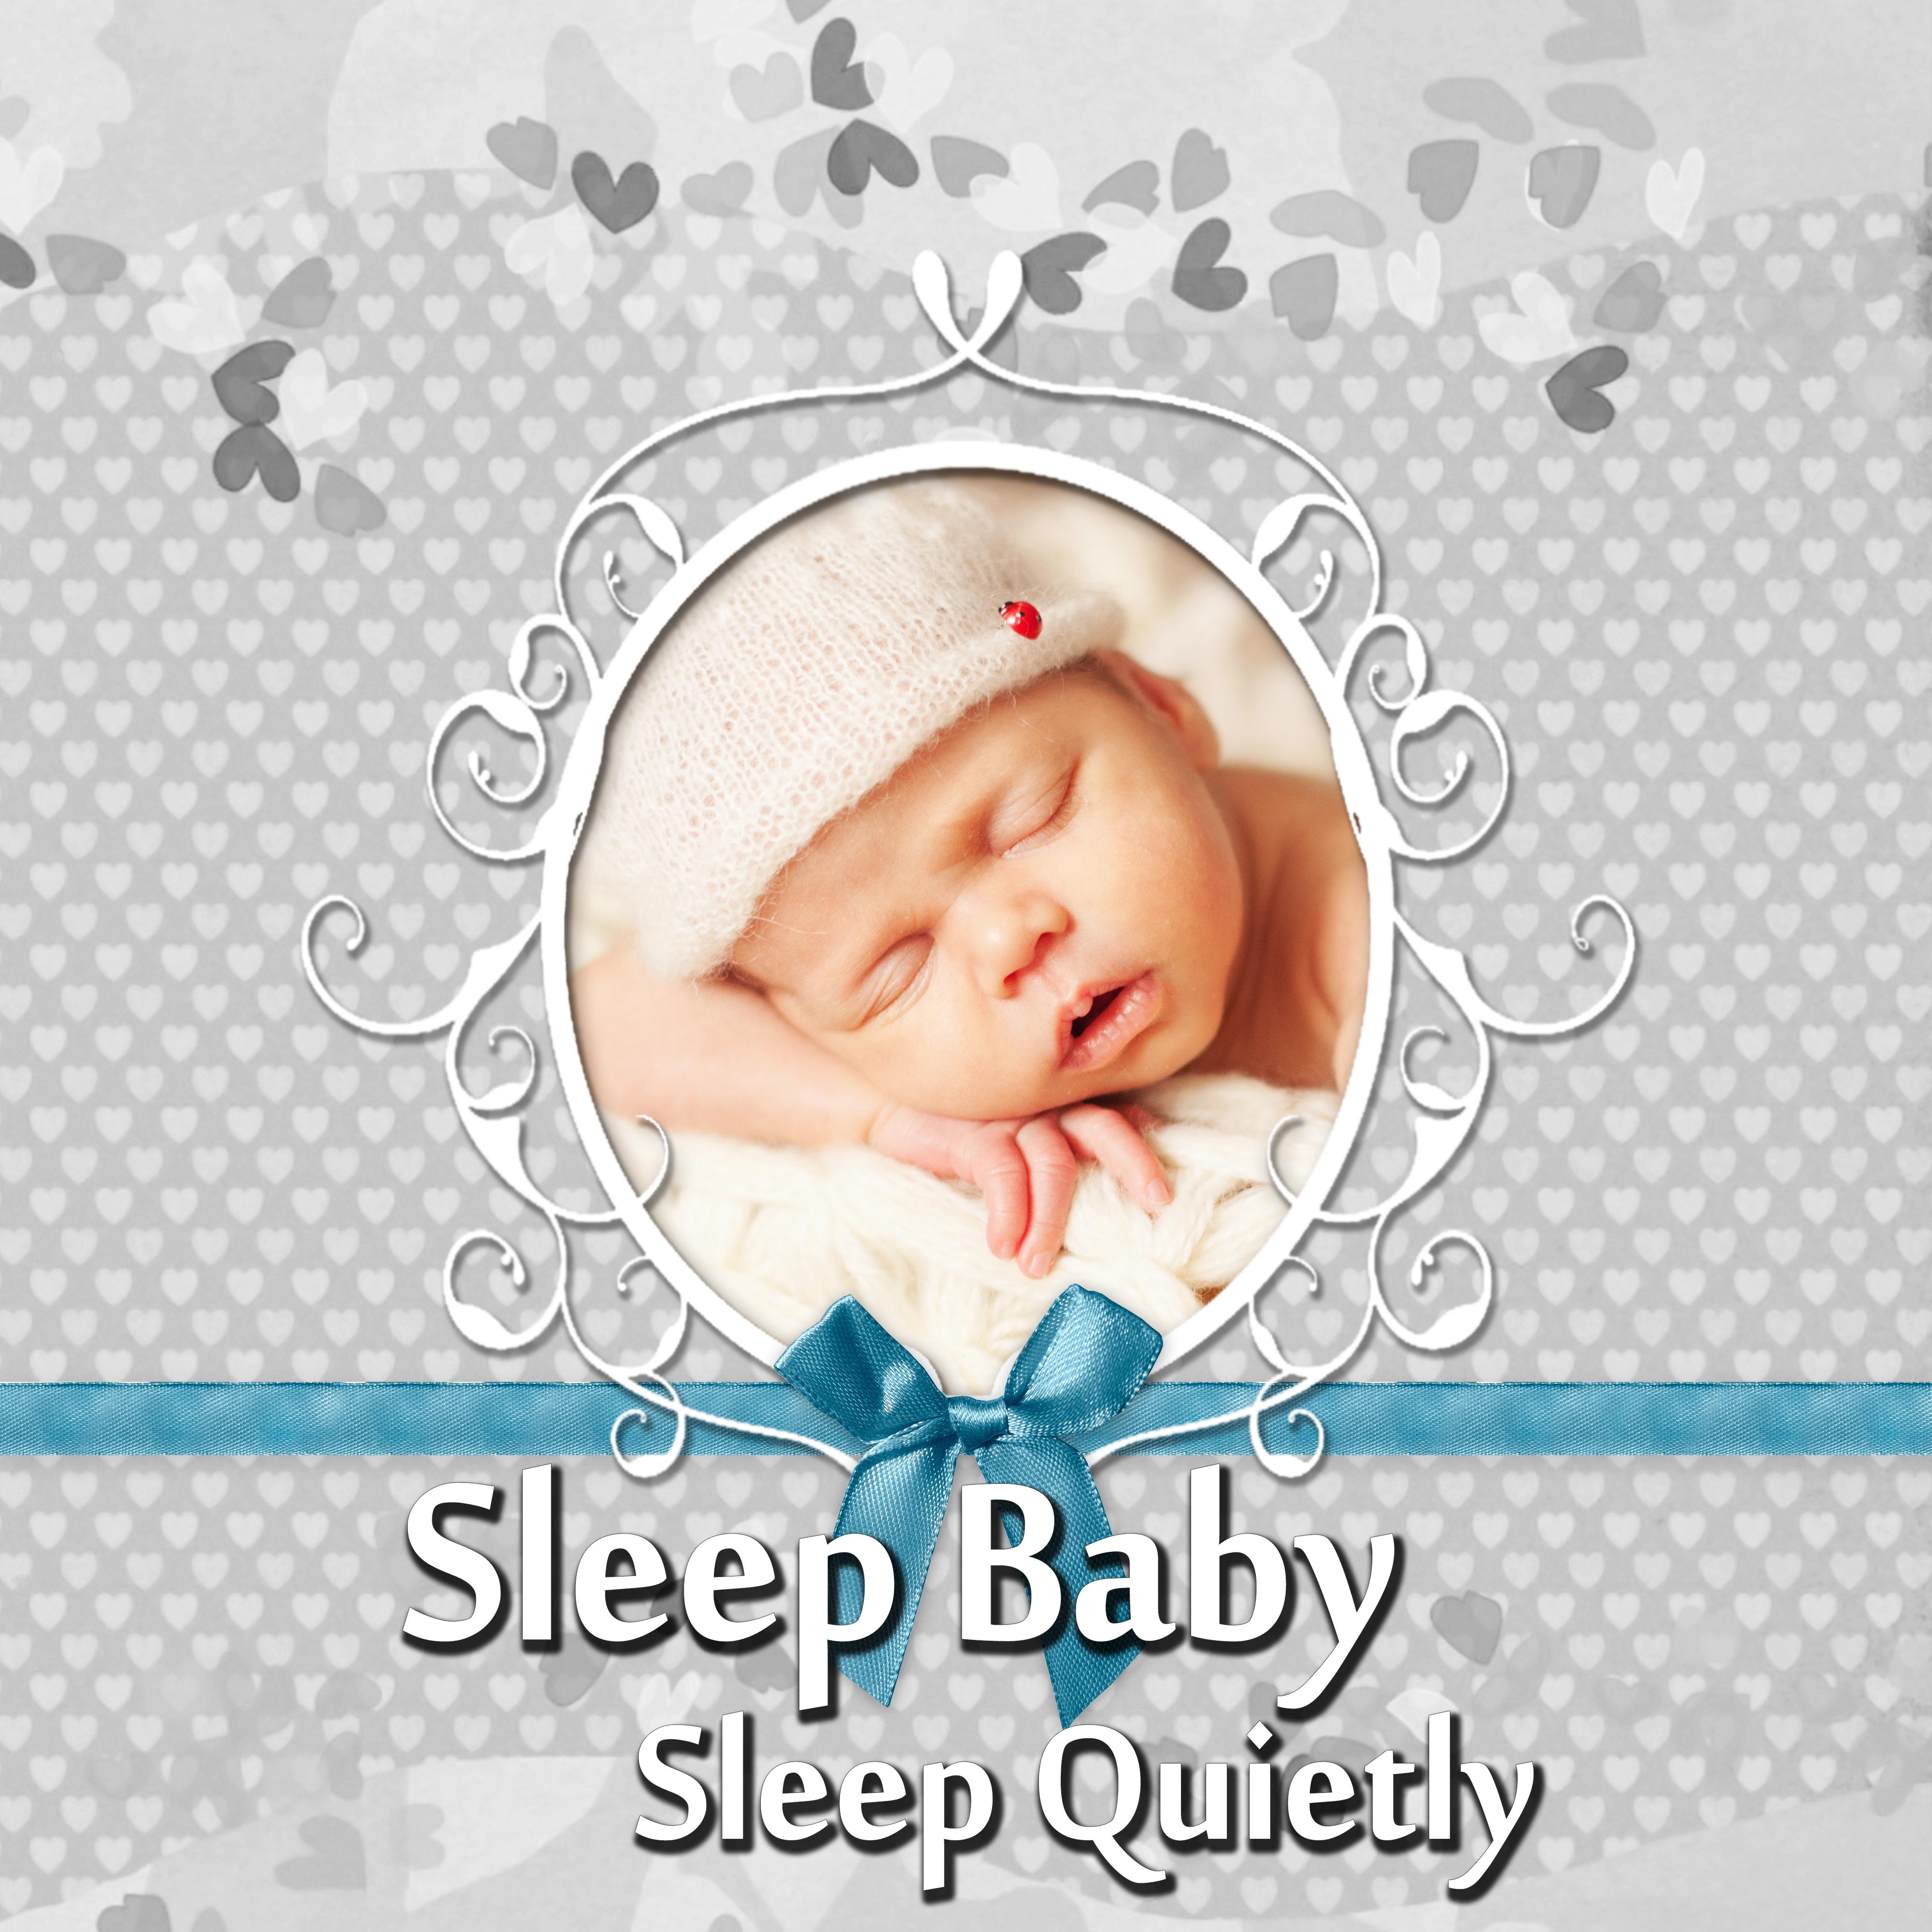 Sleep Baby Sleep Quietly  Lullabies for Your Baby, Sleep and Calming Relaxation, Soothing Harp Music for Goodnight